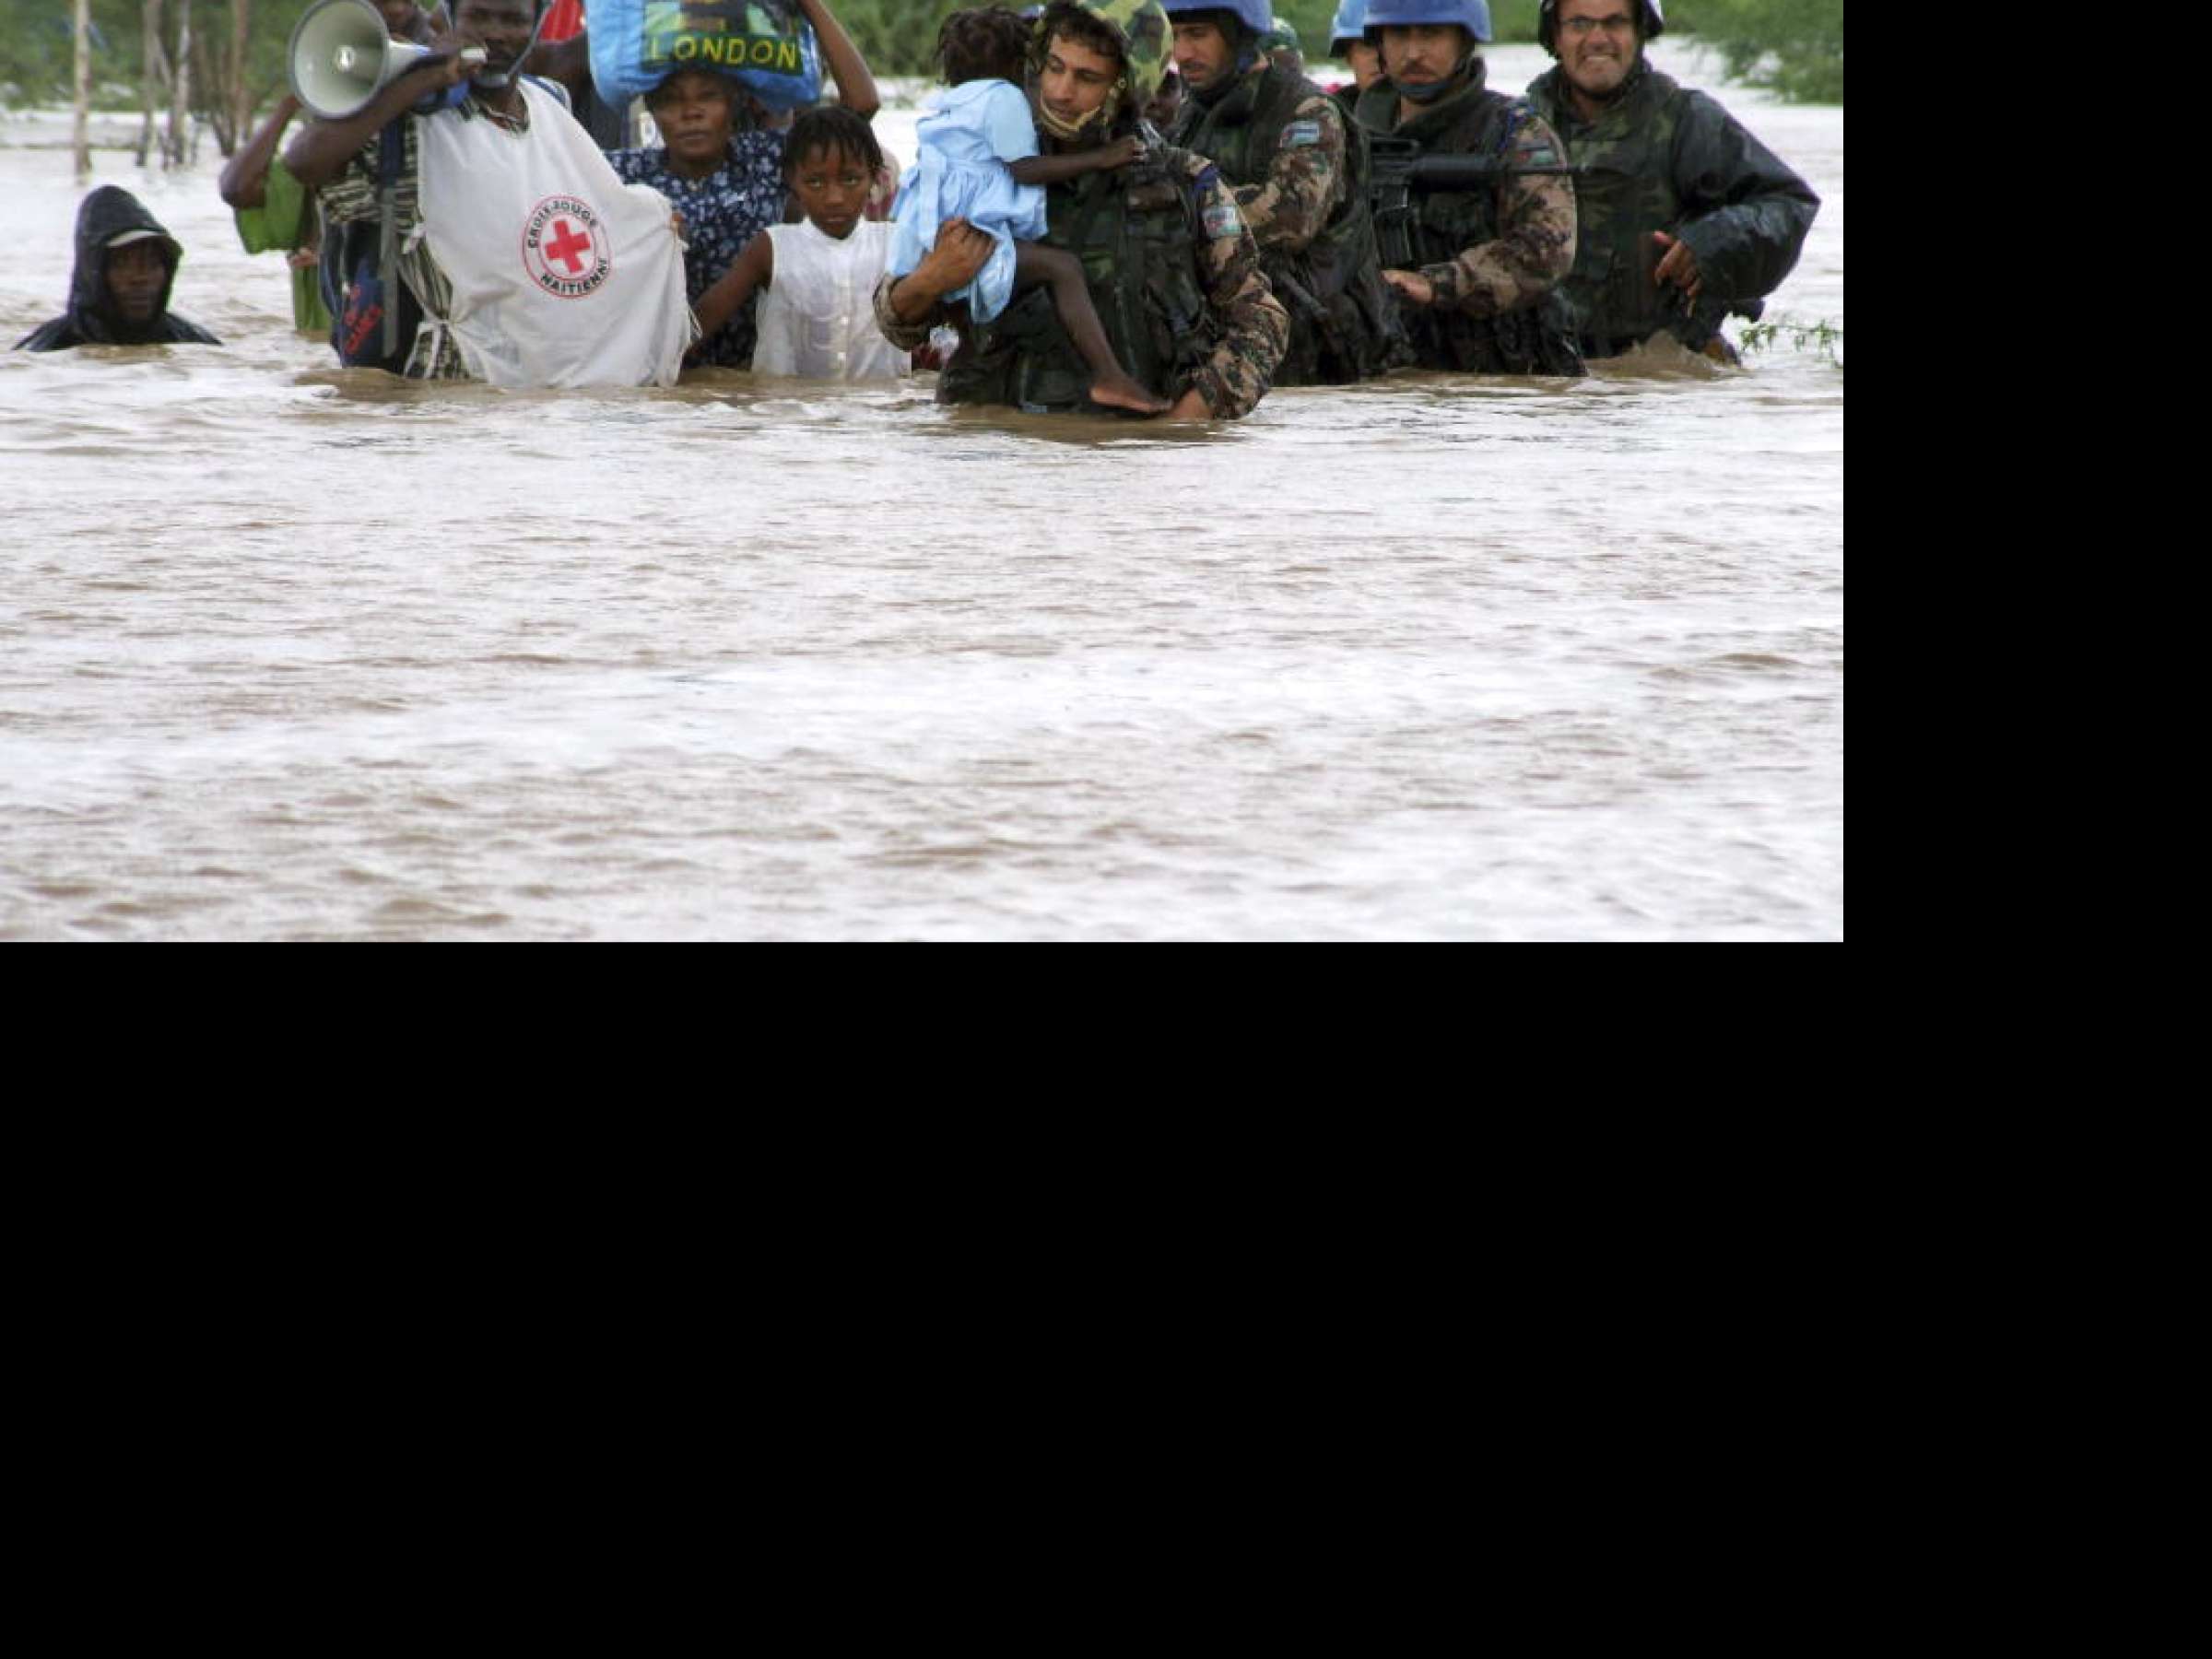 Members of the Jordanian battalion of the United Nations Stabilization Mission in Haiti (MINUSTAH) carry children through flood waters after a rescue from an orphanage destroyed by hurricane "Ike".